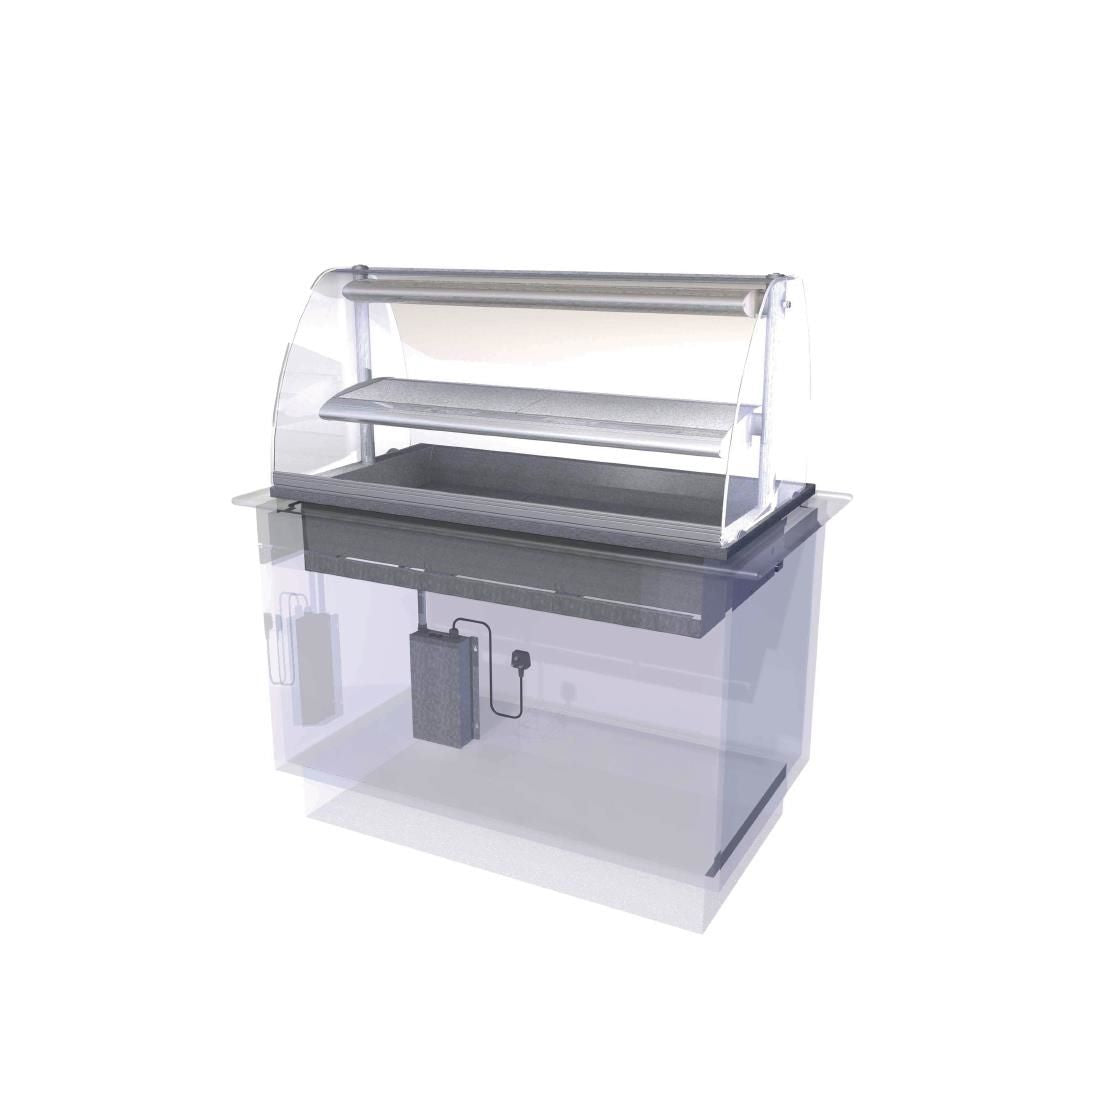 CW617 Designline Drop In Heated Serve Over Counter HDL4 JD Catering Equipment Solutions Ltd